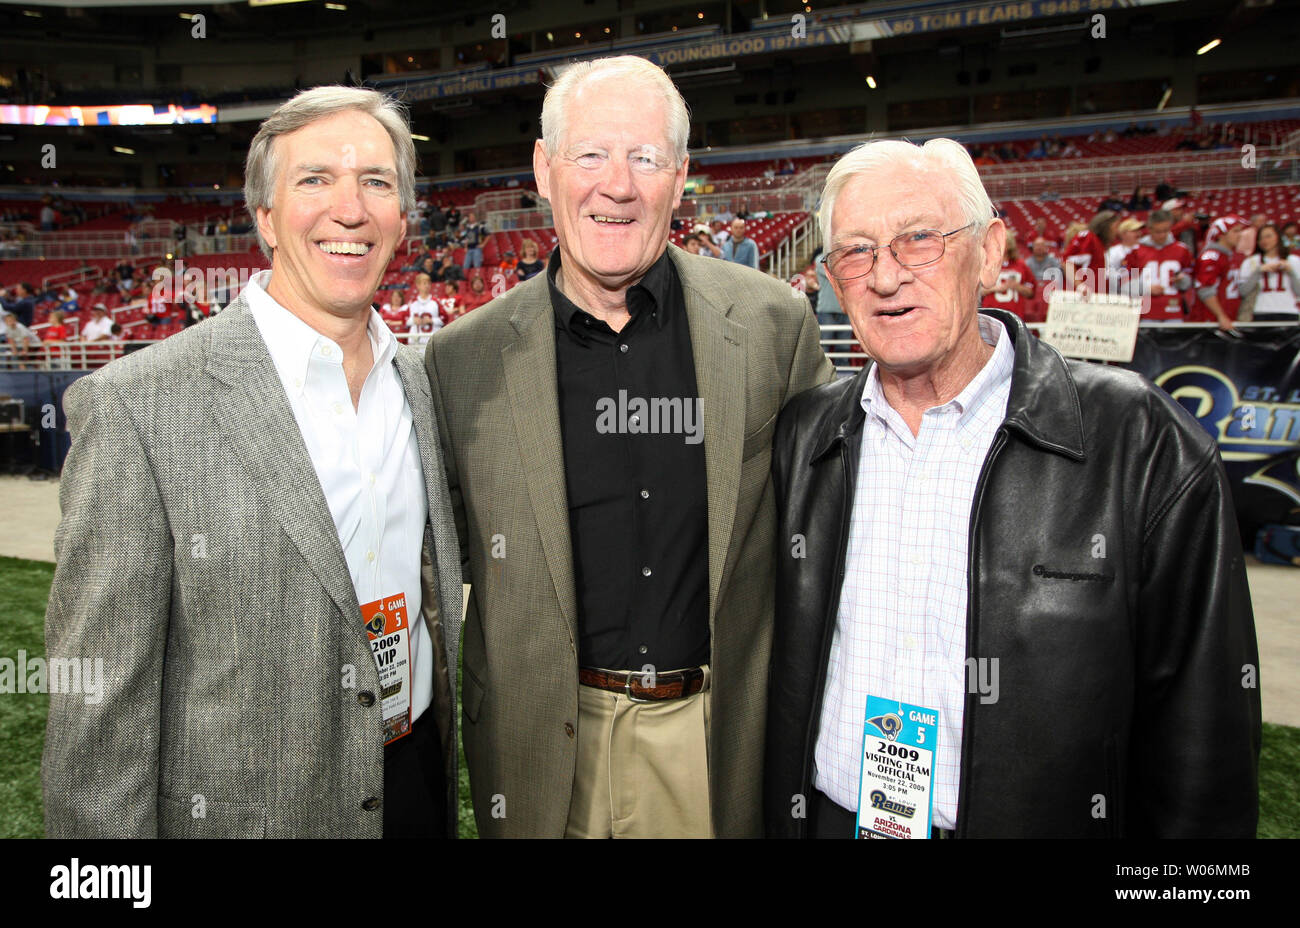 Former St. Louis Football Cardinals players and members of the Pro Football Hall of Fame (L to R) Roger Wehrli, Jackie Smith and Larry Wilson, gather for a photograph before a game between the Arizona Cardinals and the St. Louis Rams at the Edward Jones Dome in St. Louis on November 22, 2009.   UPI/Bill Greenblatt Stock Photo